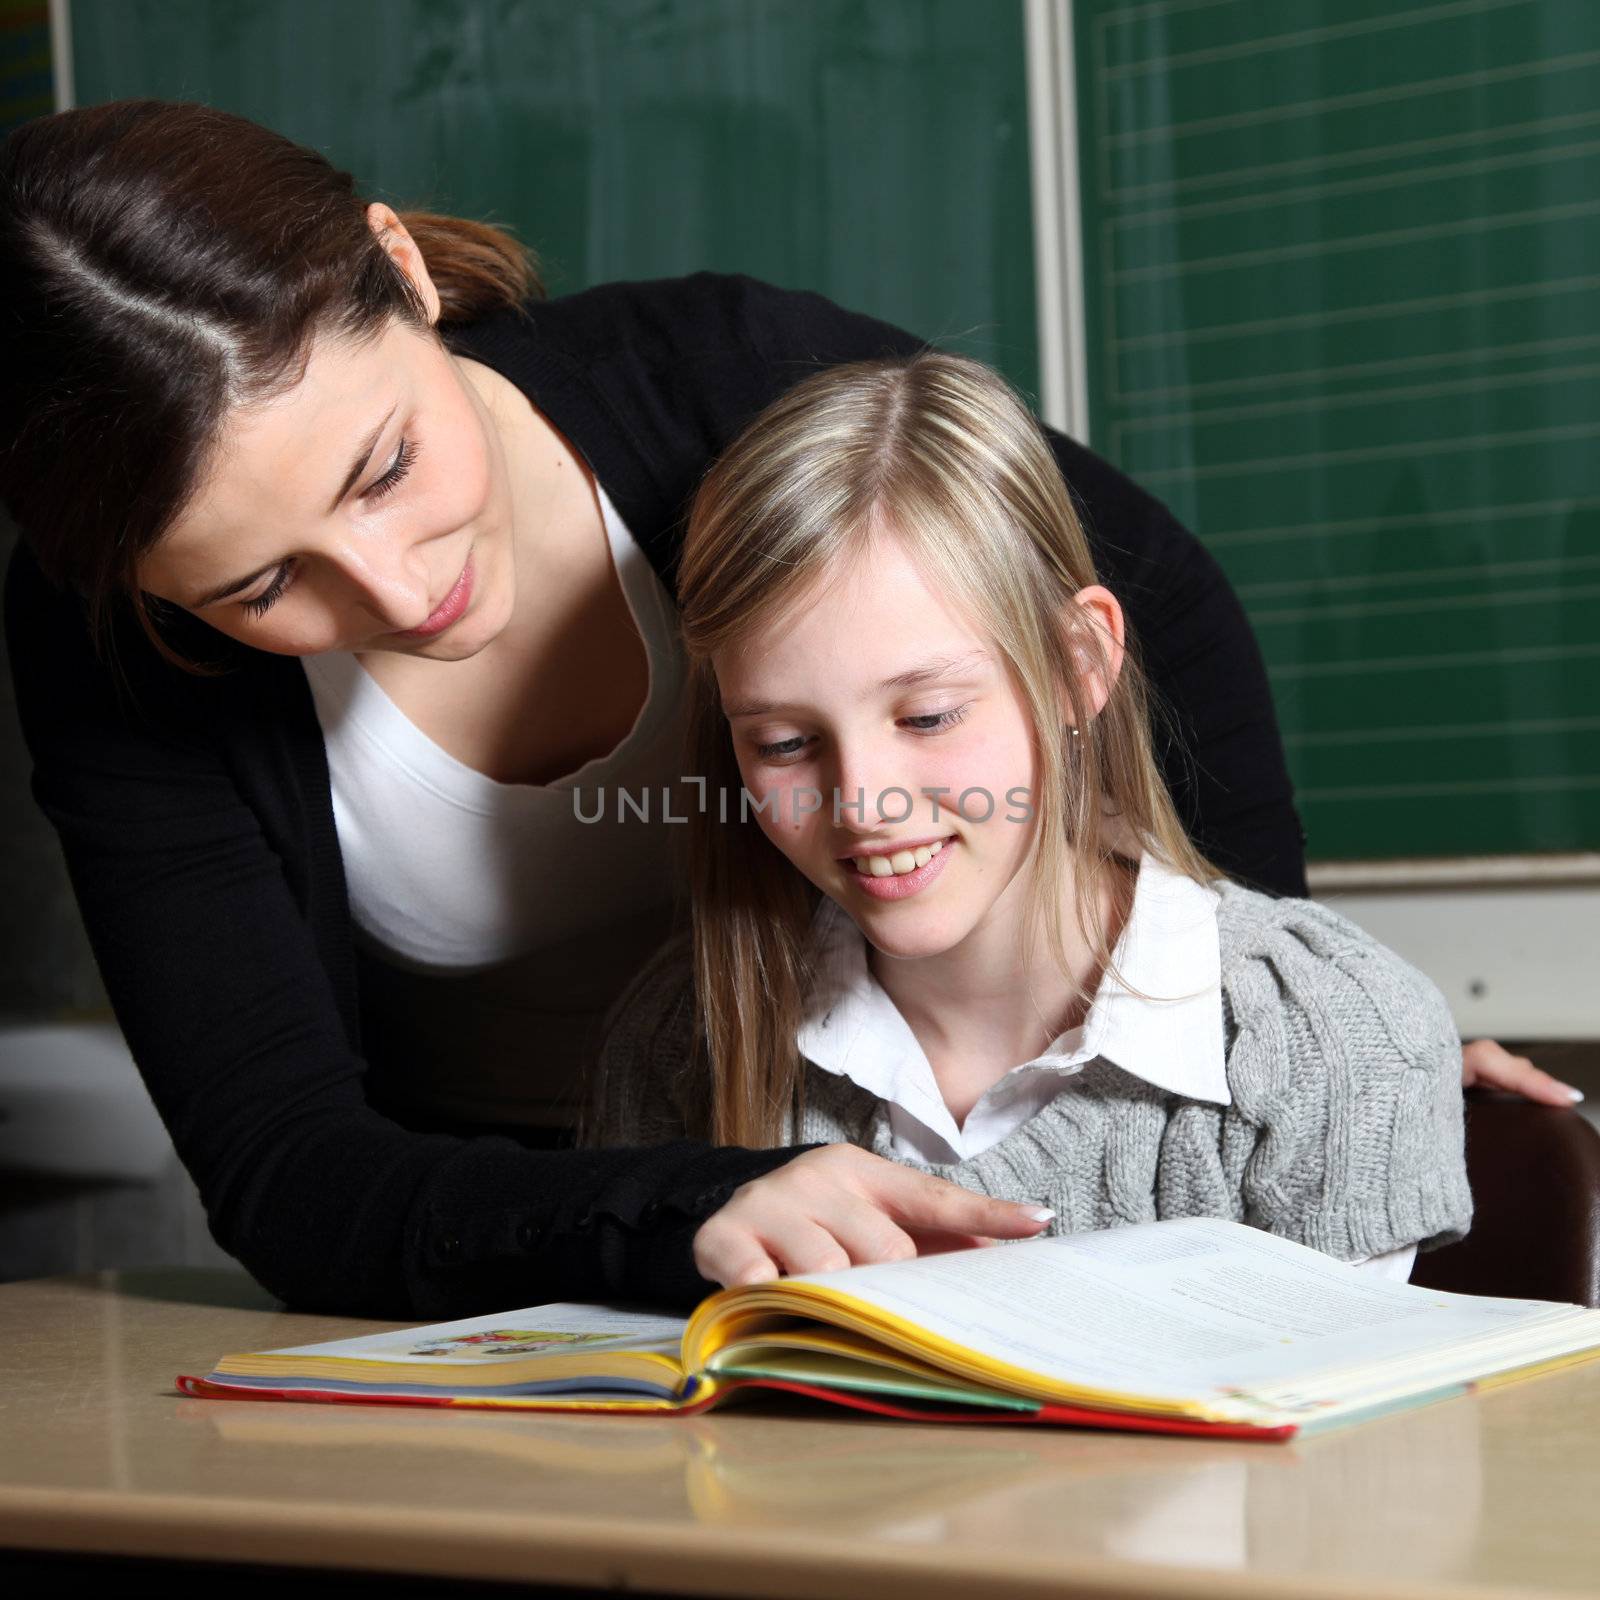 Teacher and pupil in classroom learning together.
The girl looks together with the teacher in a book. This tells the child the task. -square
